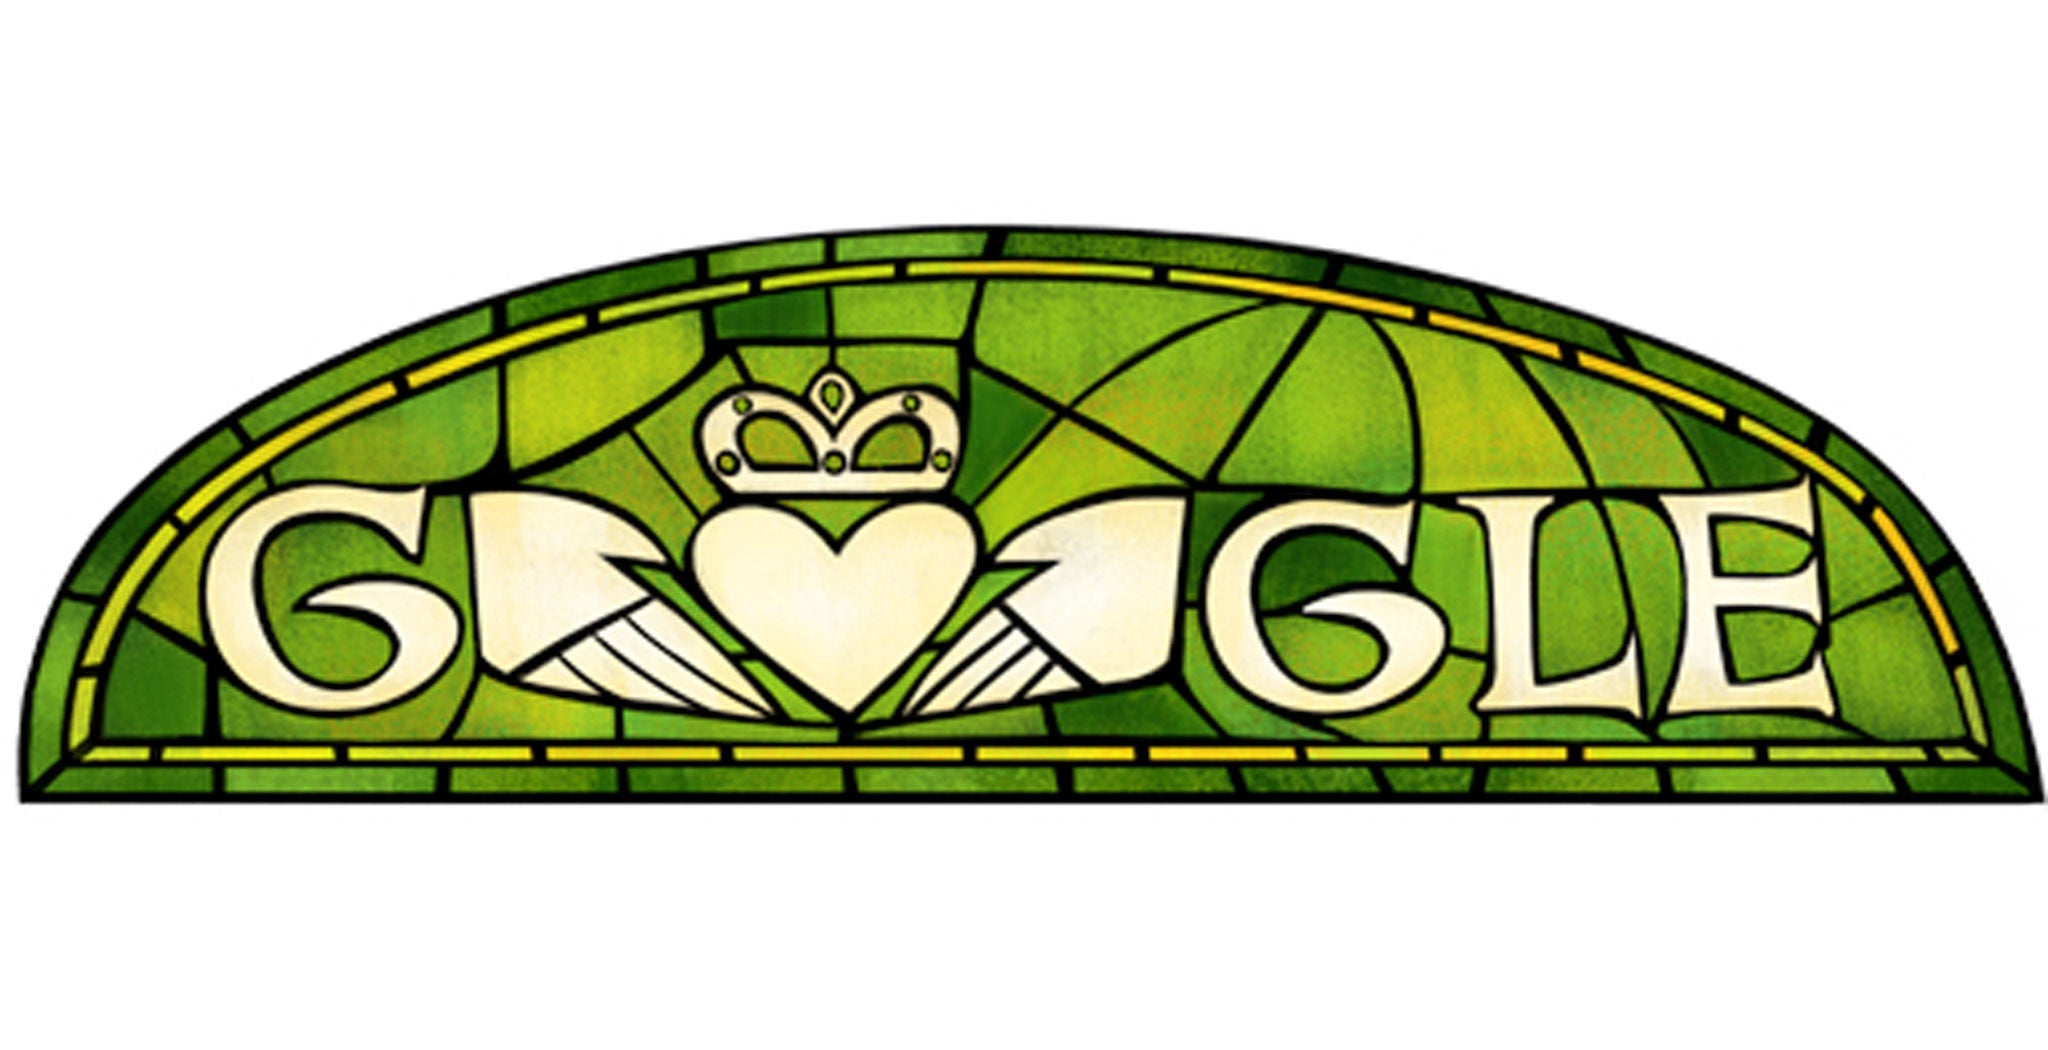 17 March: Google marked the Irish national holiday of St Patrick's Day with a very saintly green stained-glass Doodle